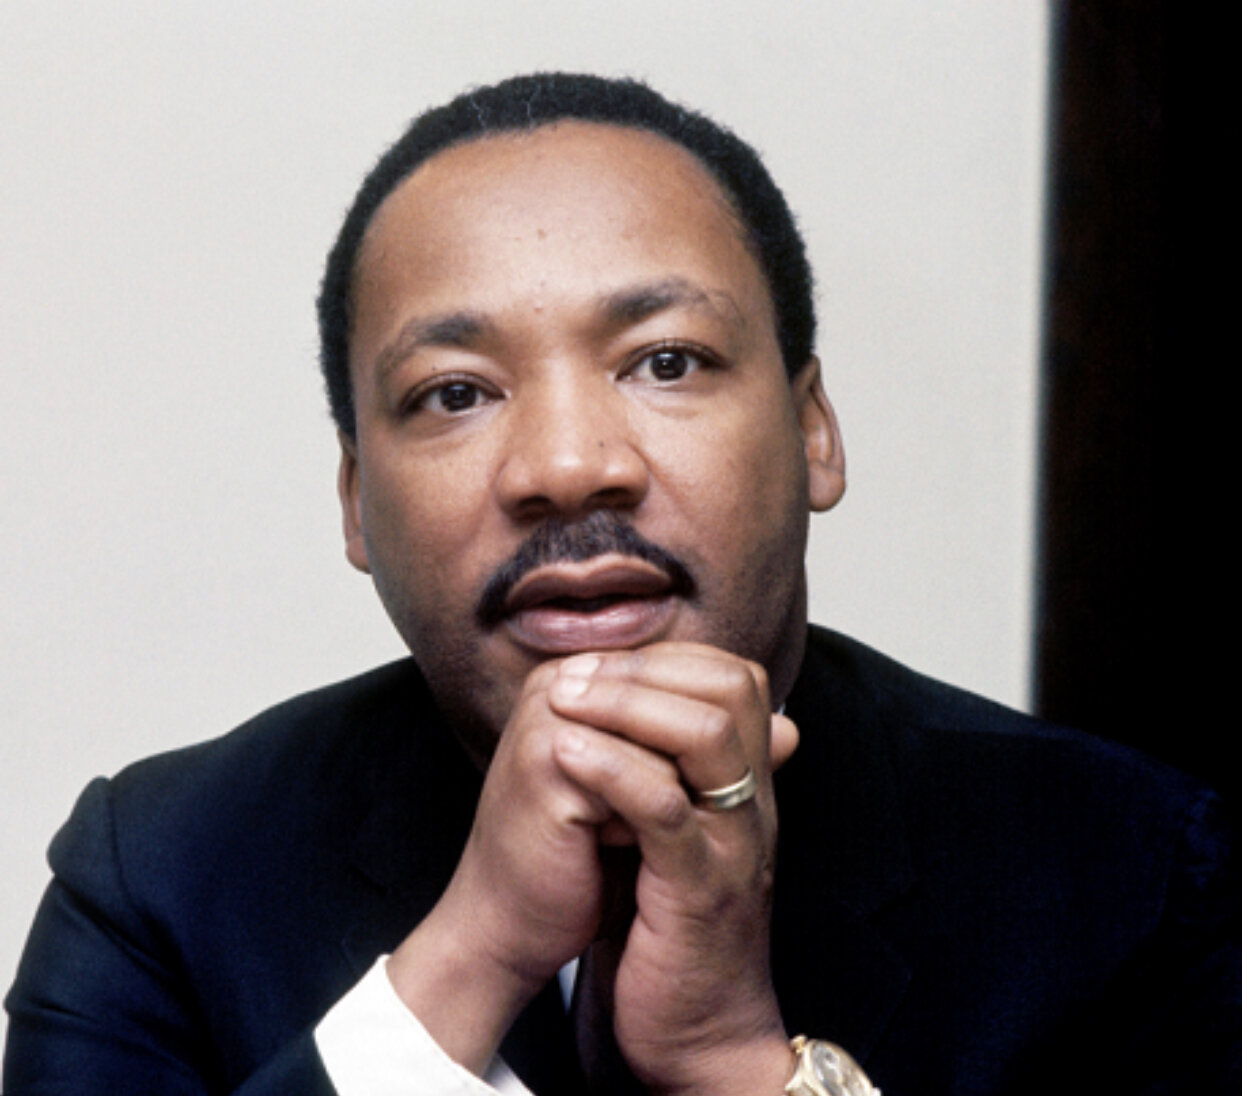 Martin Luther King, Jr.